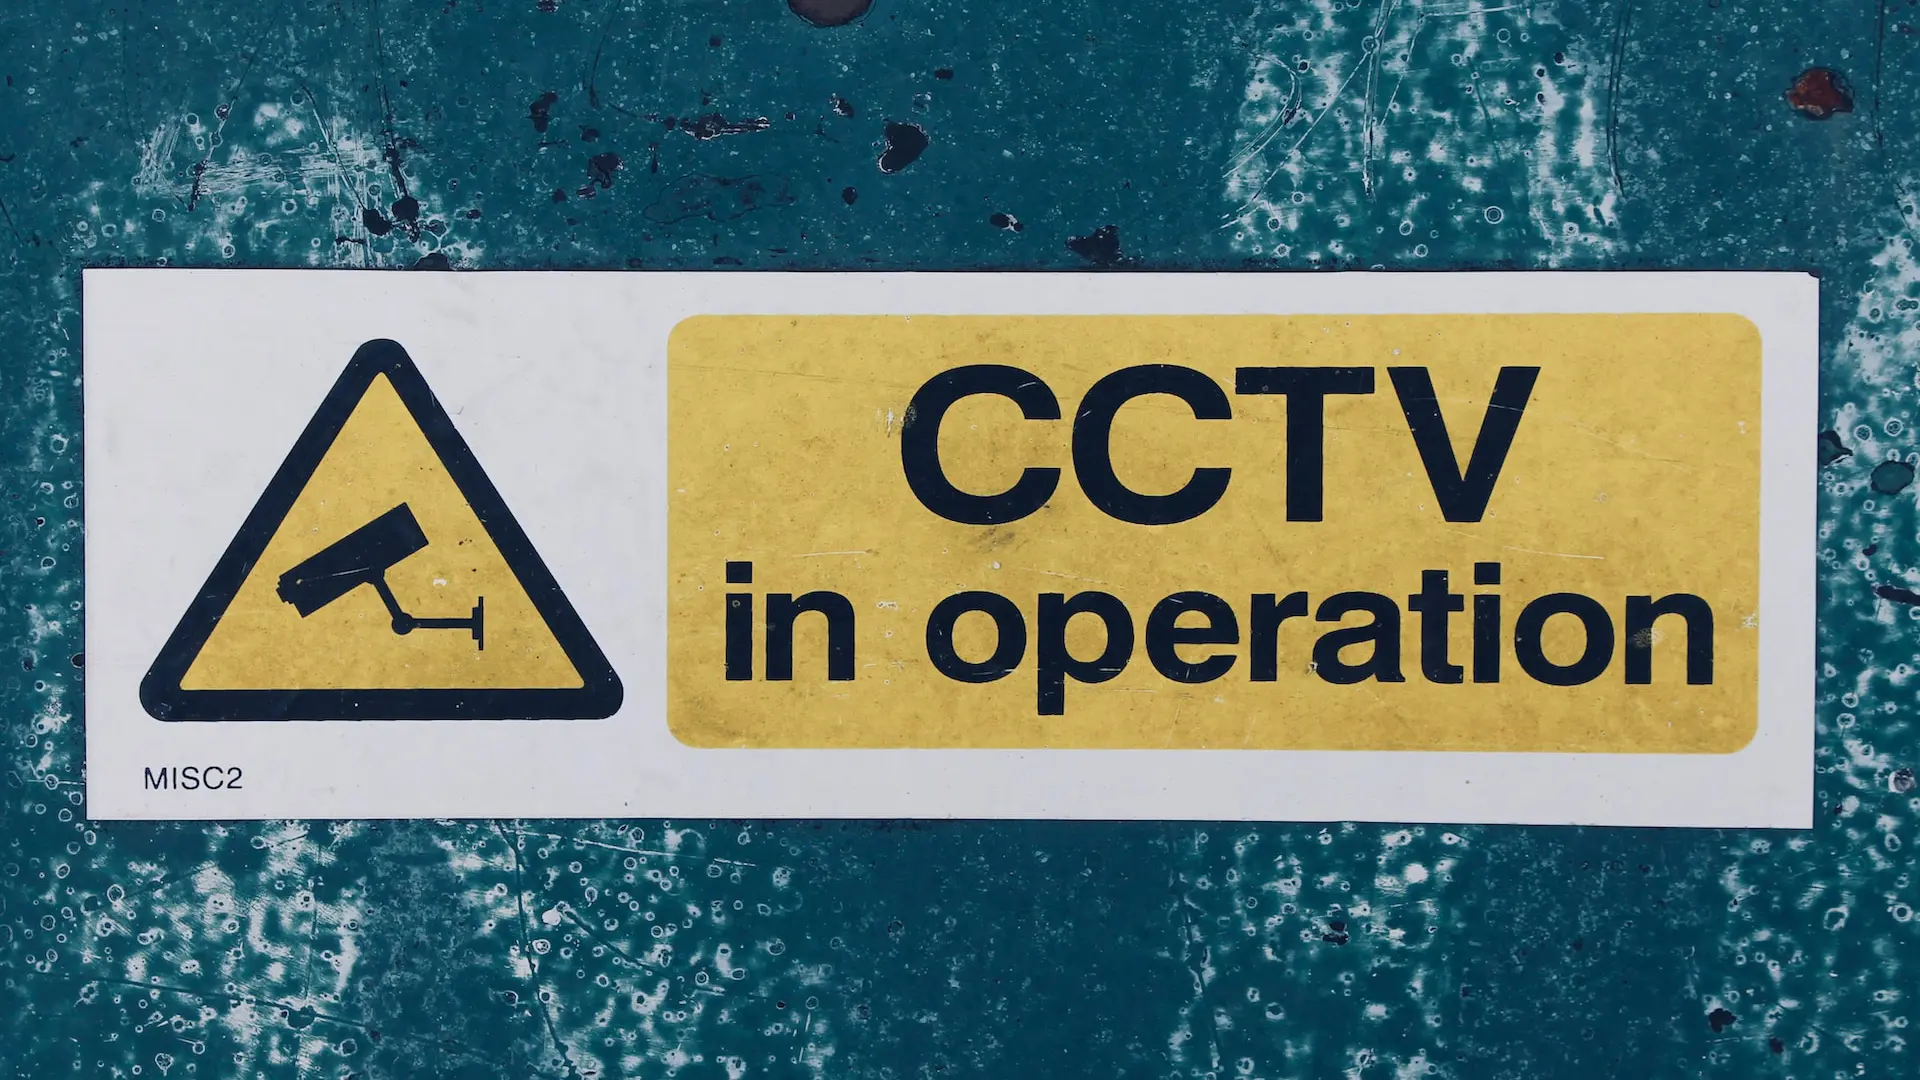 CCTV in operation - Photo by Rich Smith